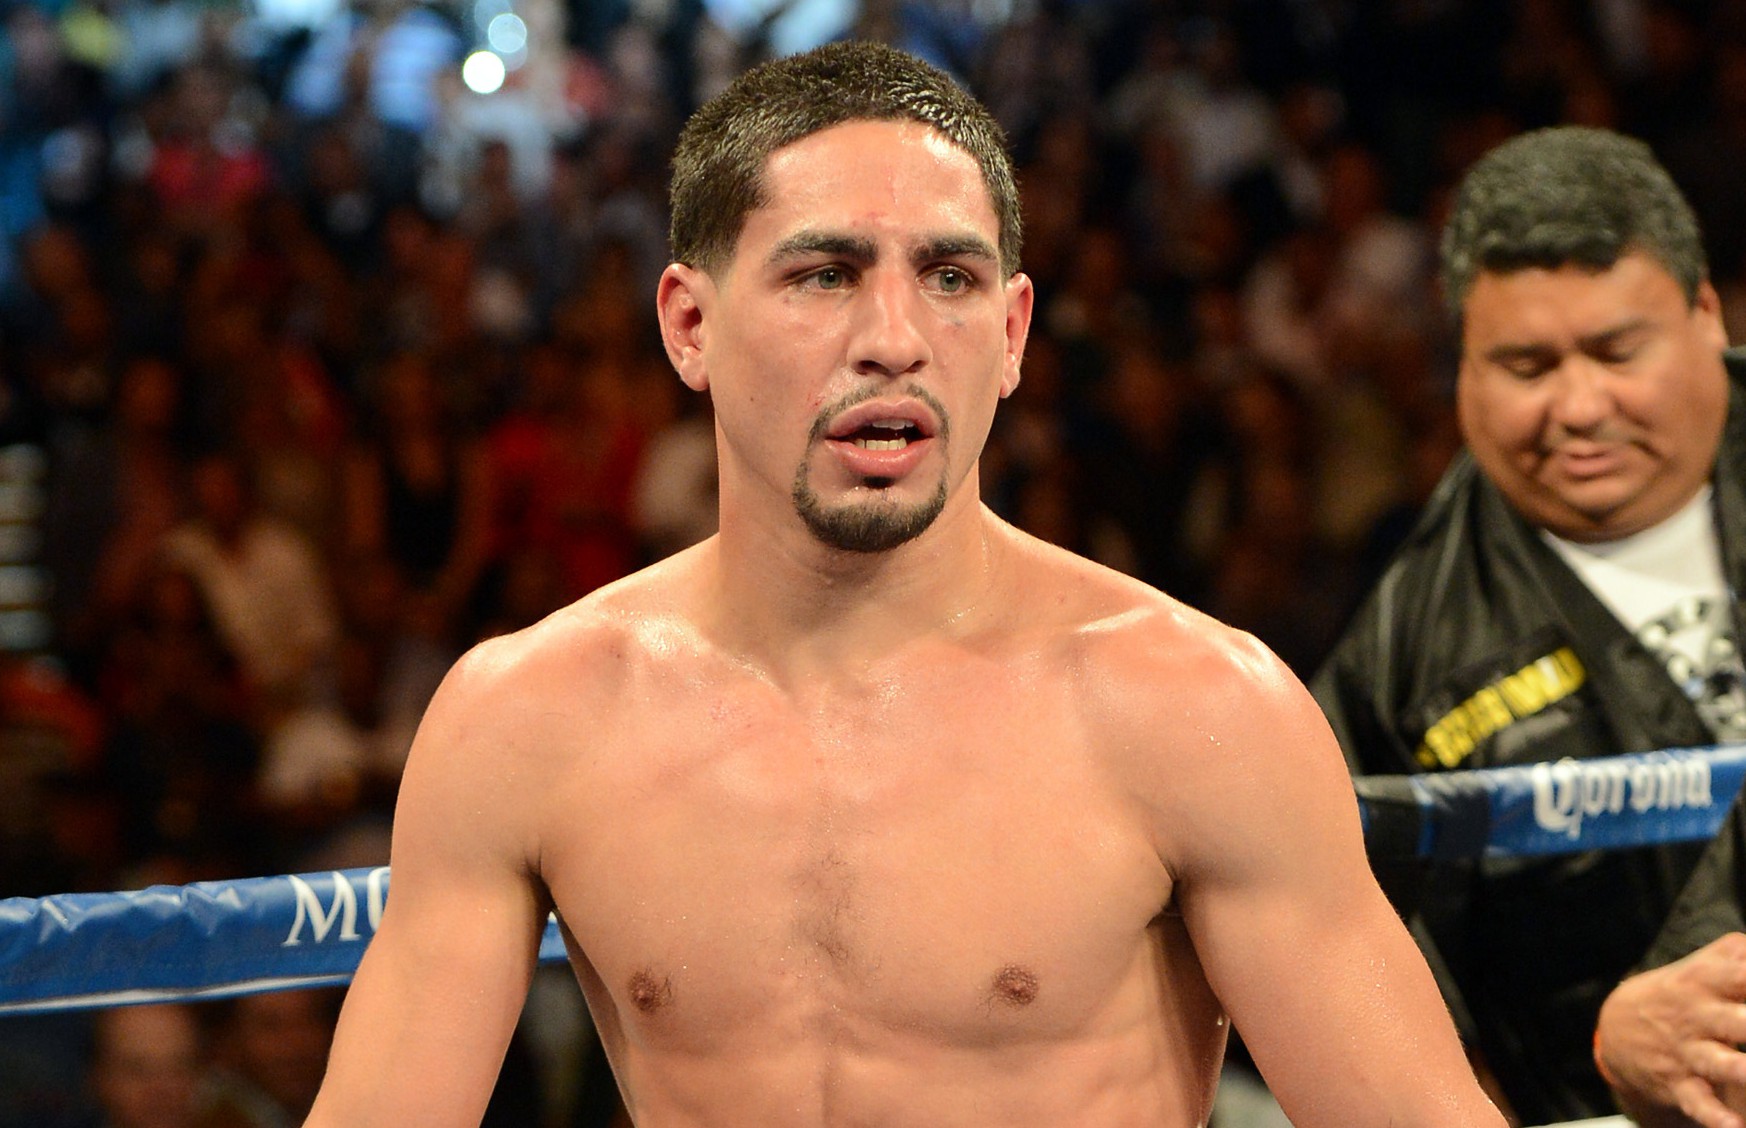 Undefeated boxing champion Danny Garcia reveals his sixth toe For The Win